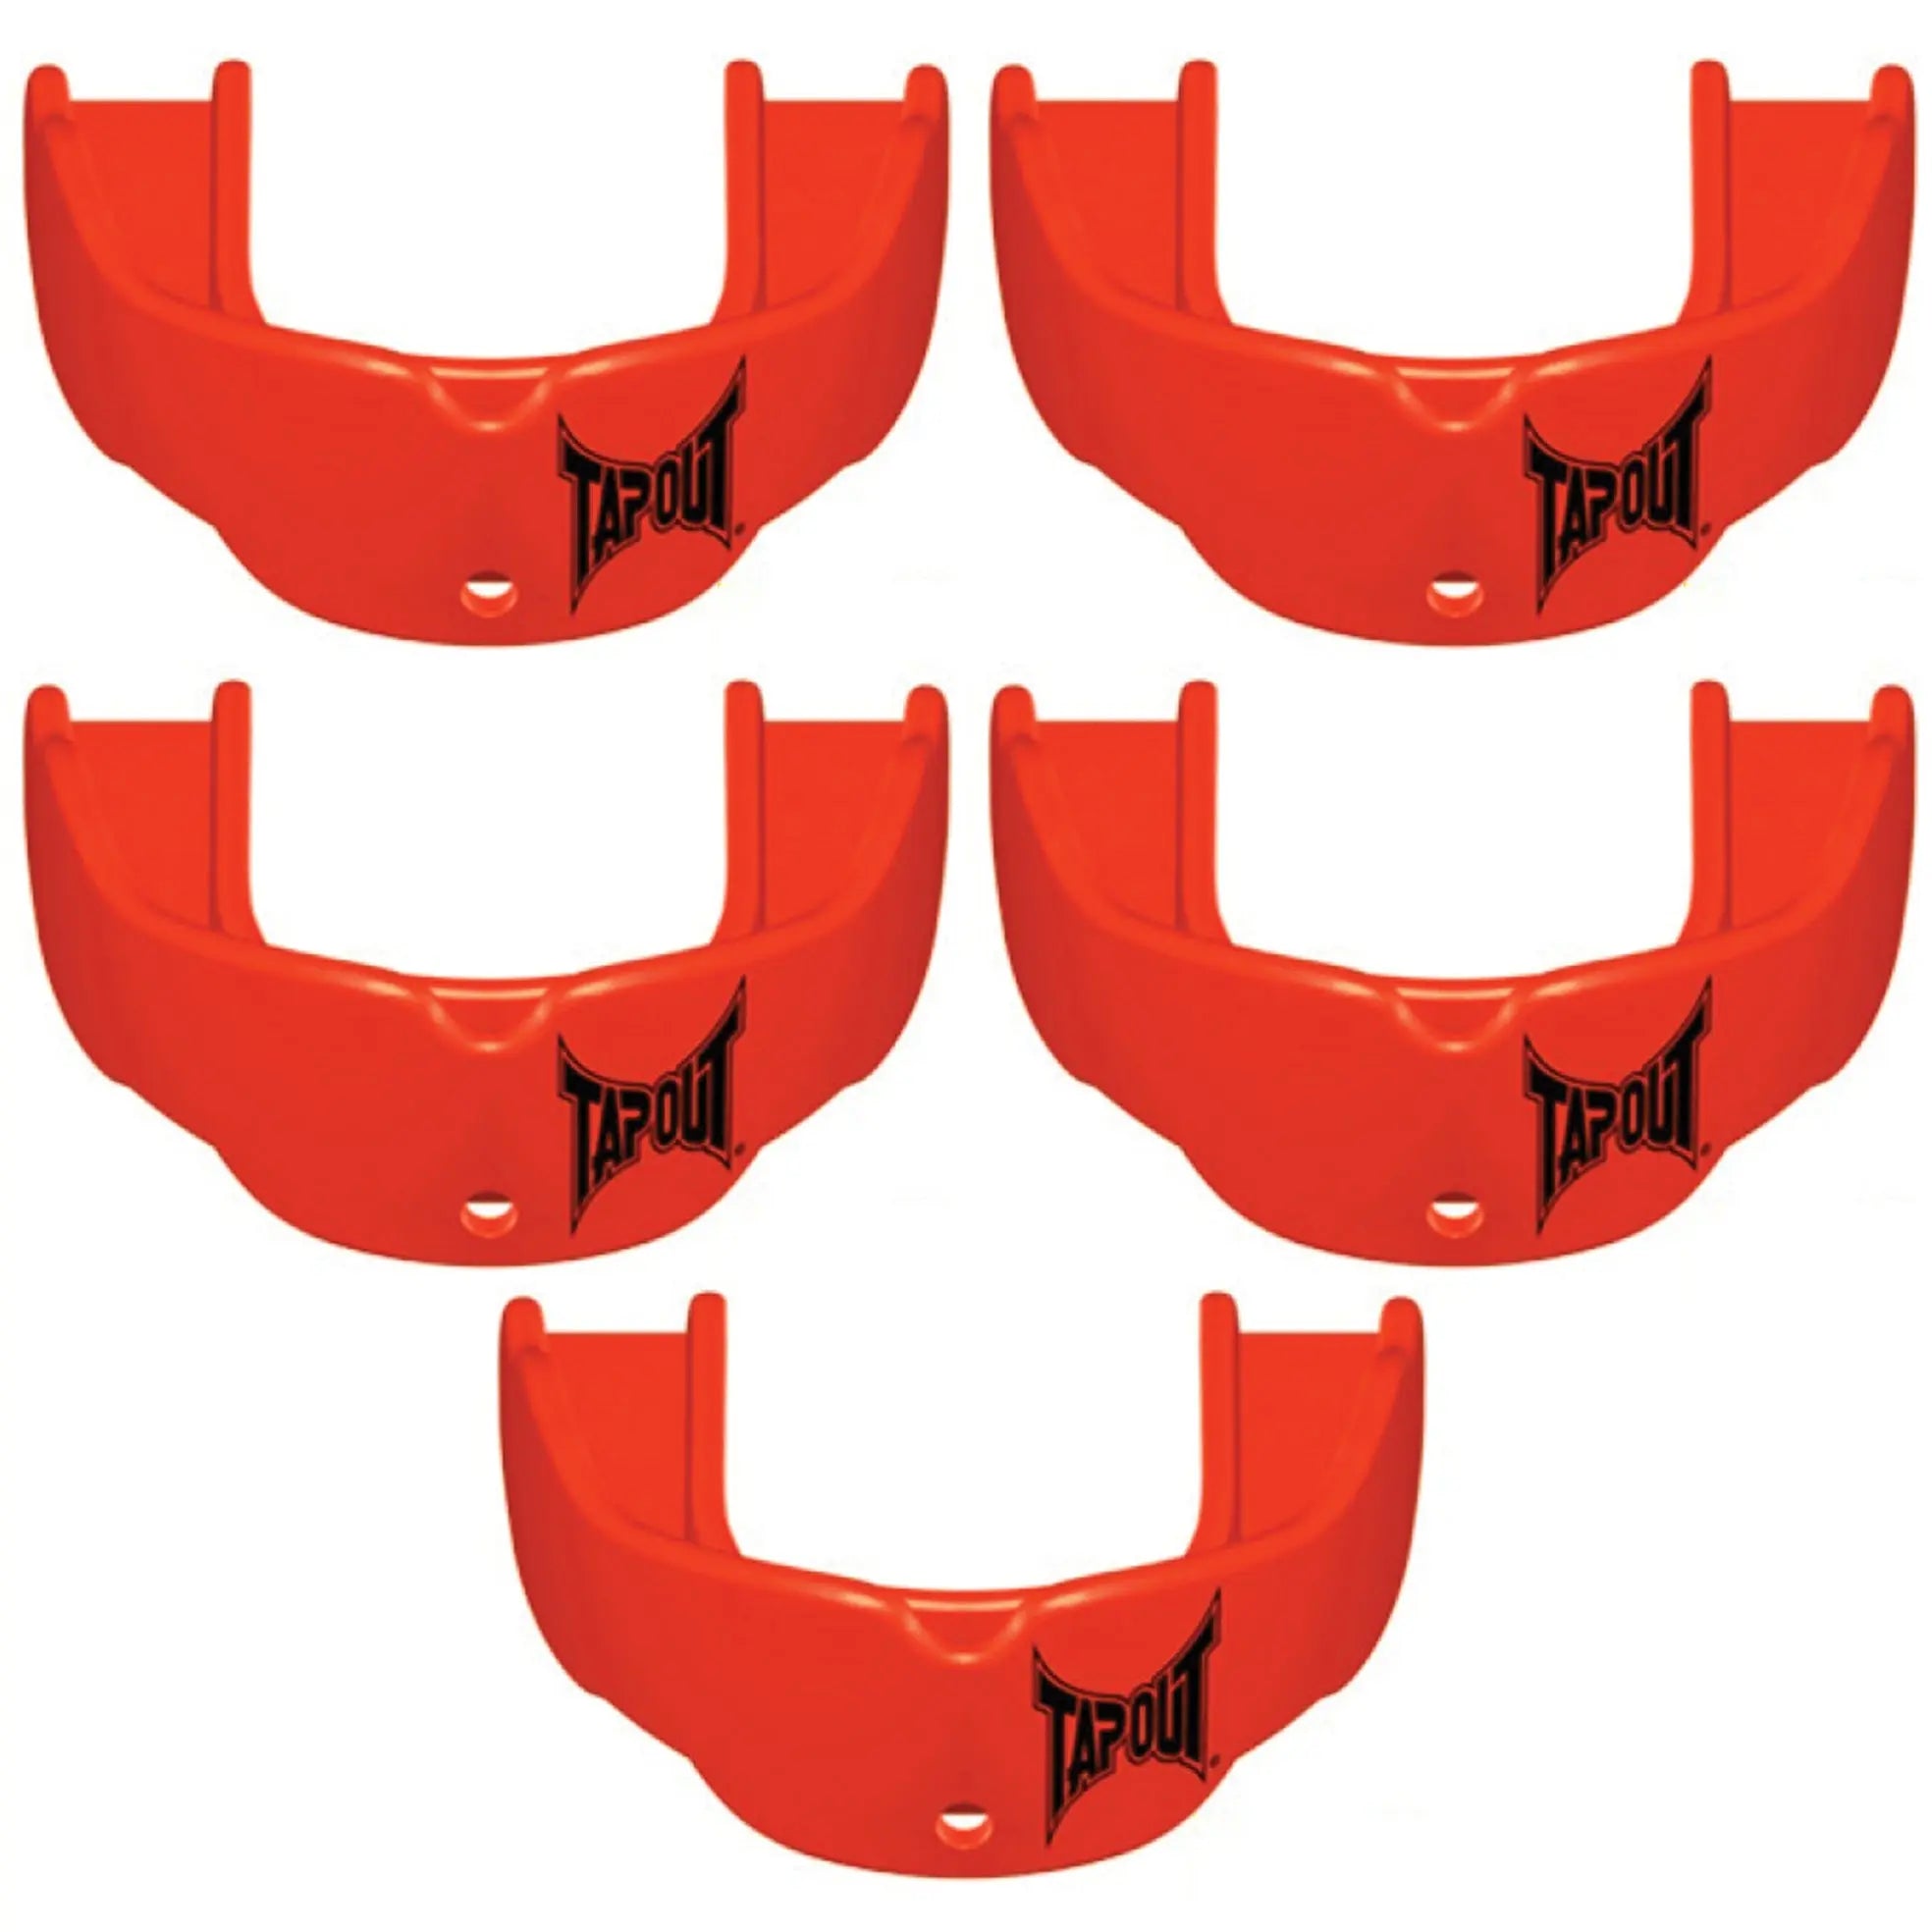 Tapout Adult Protective Sports Mouthguard with Strap 5-Pack - Neon Orange Battle Sports